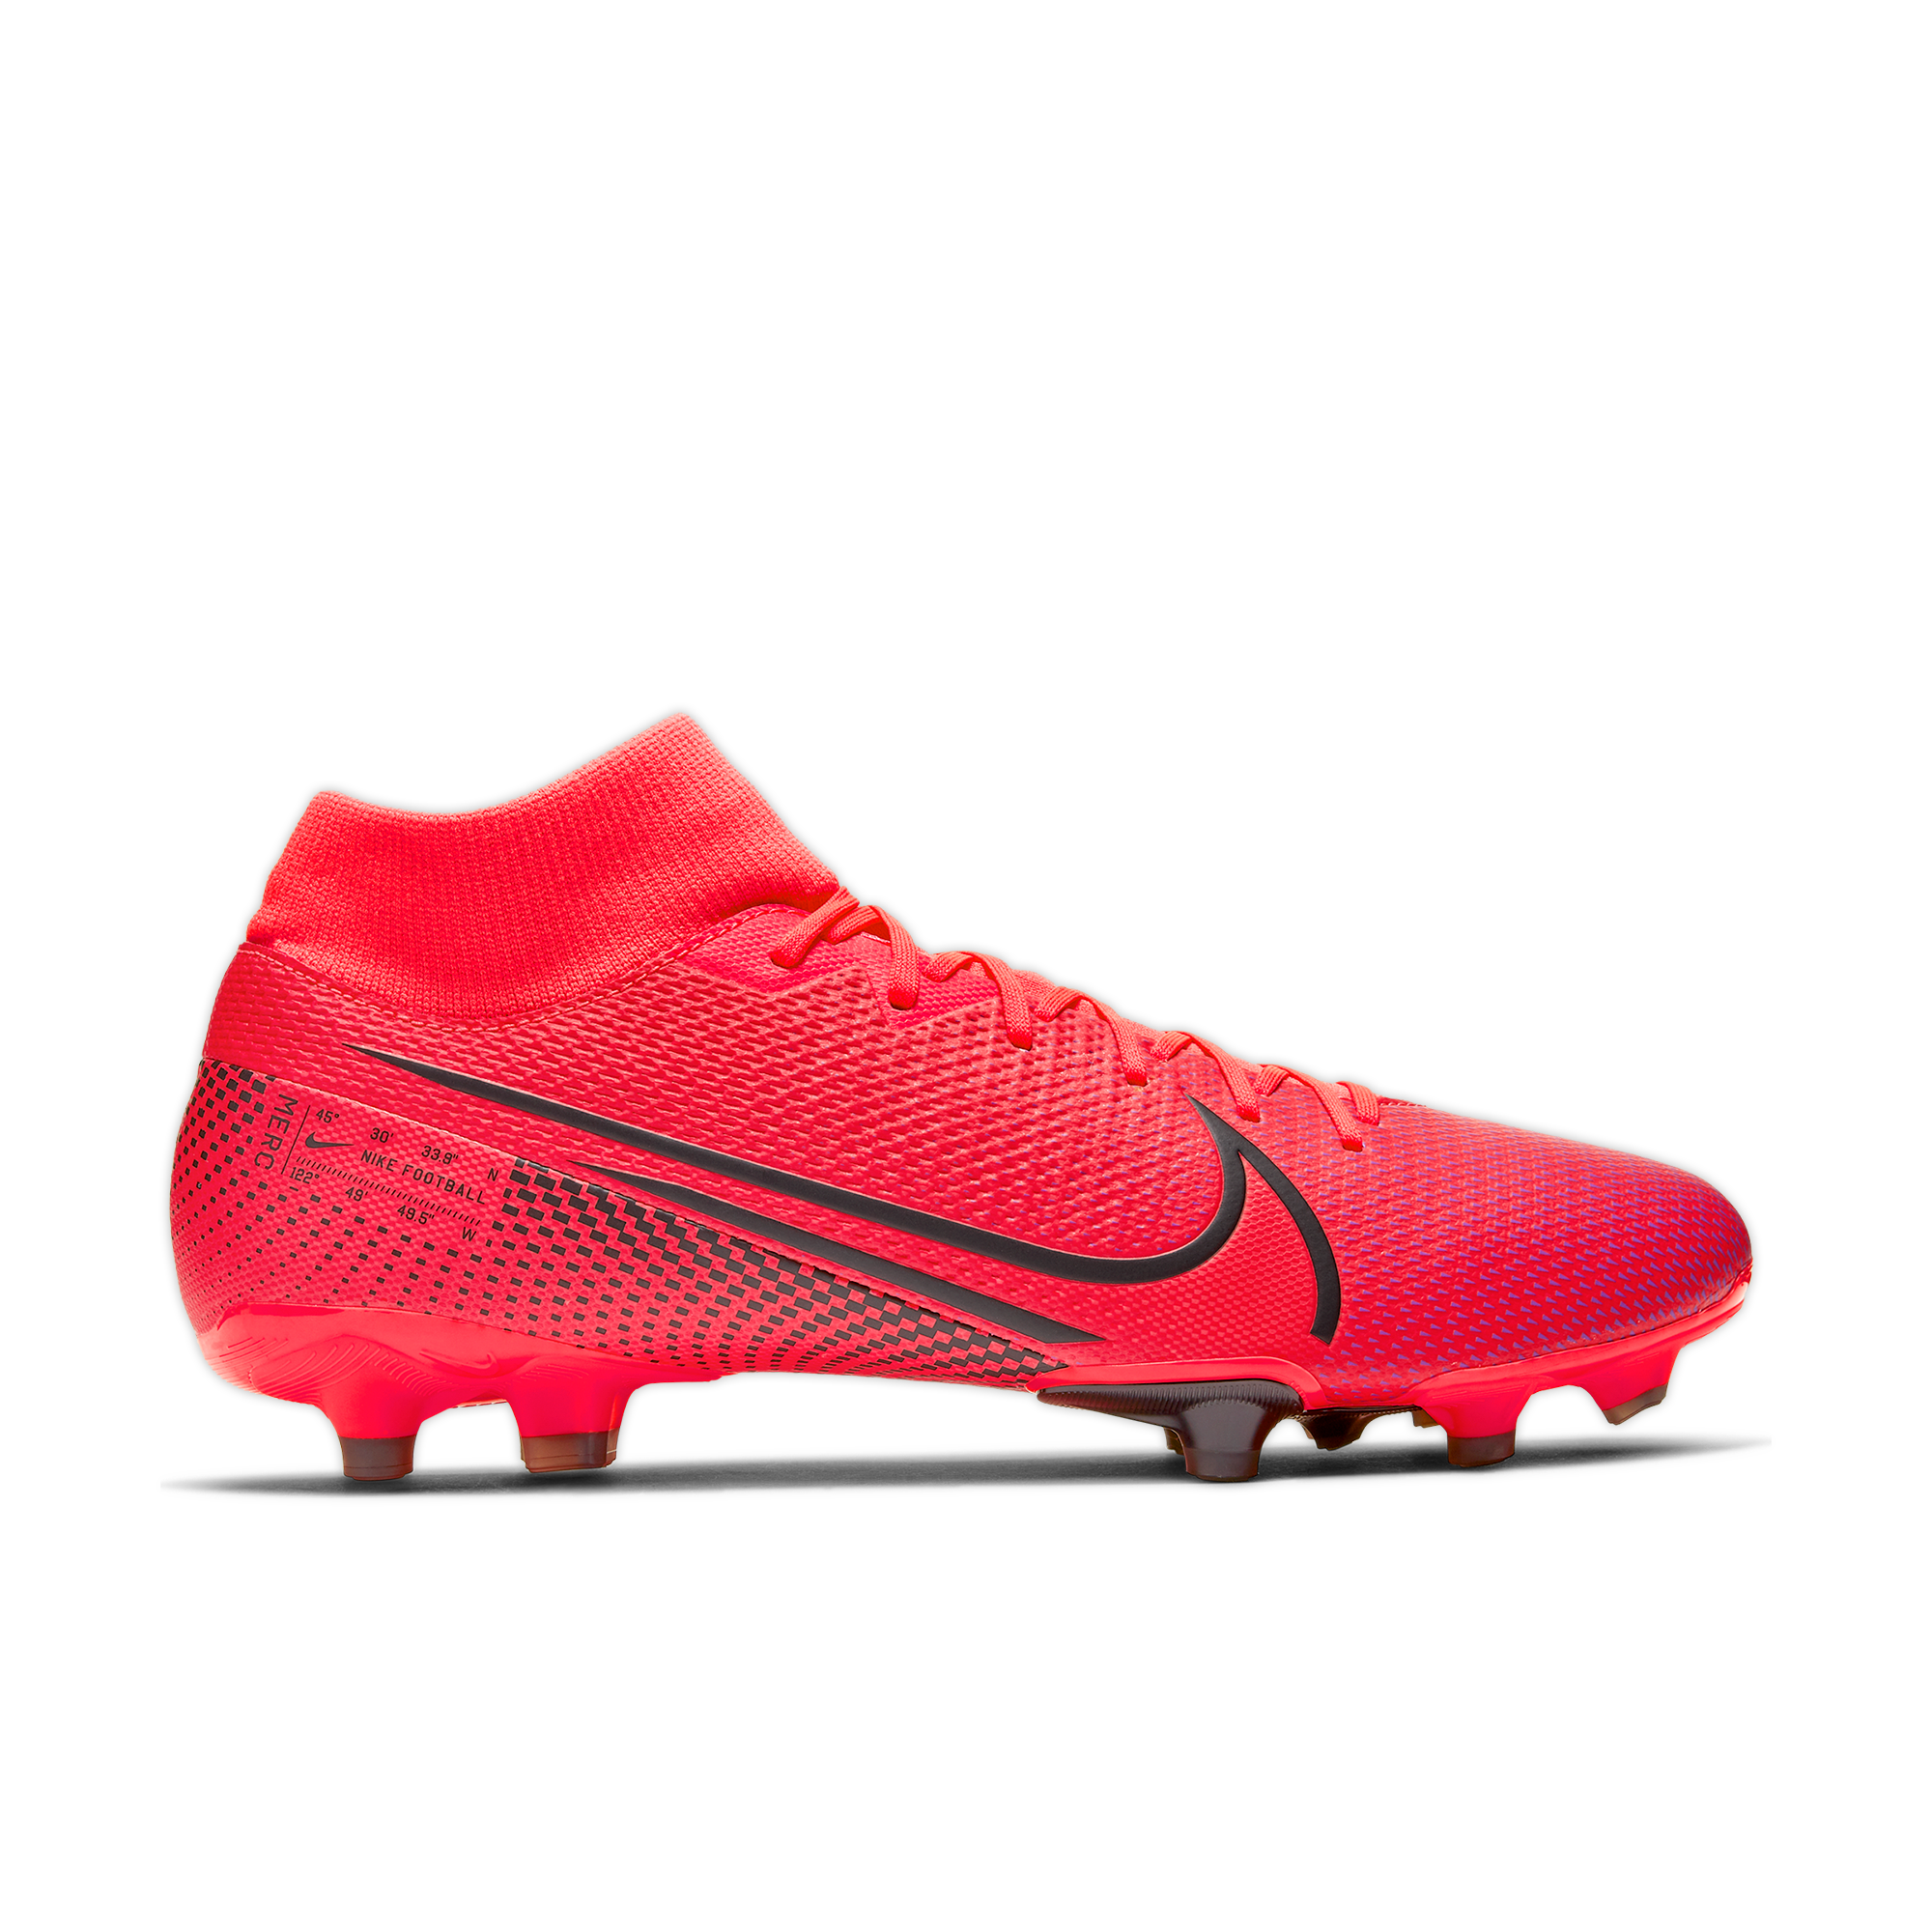 soccer cleats under 20 dollars